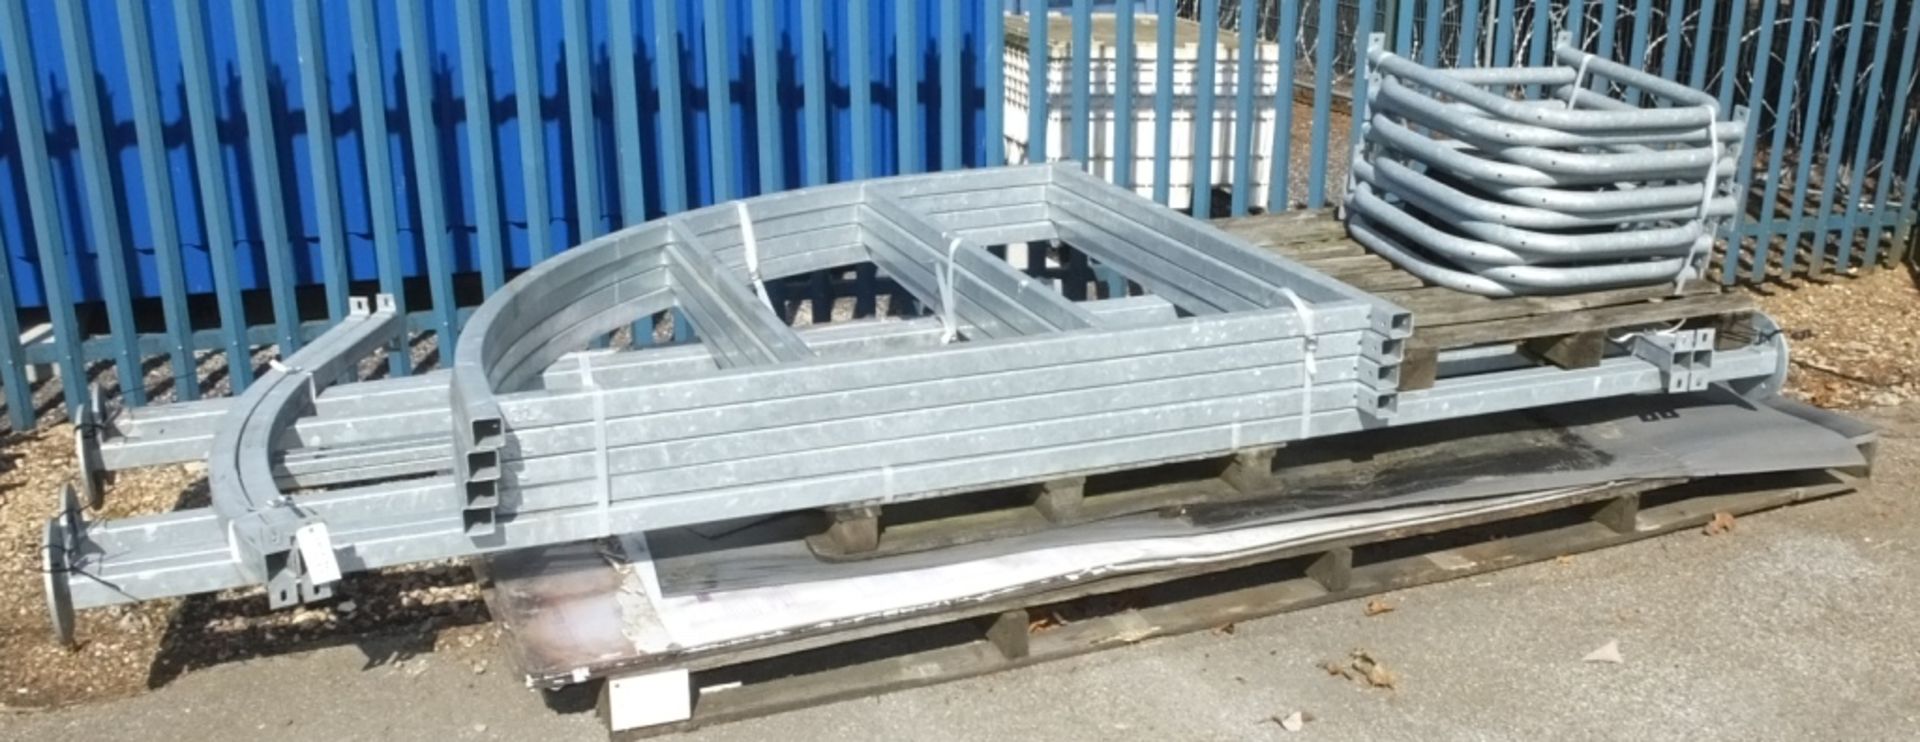 Heavy Duty Galvanised Metal Cycle Rack Bay assembly